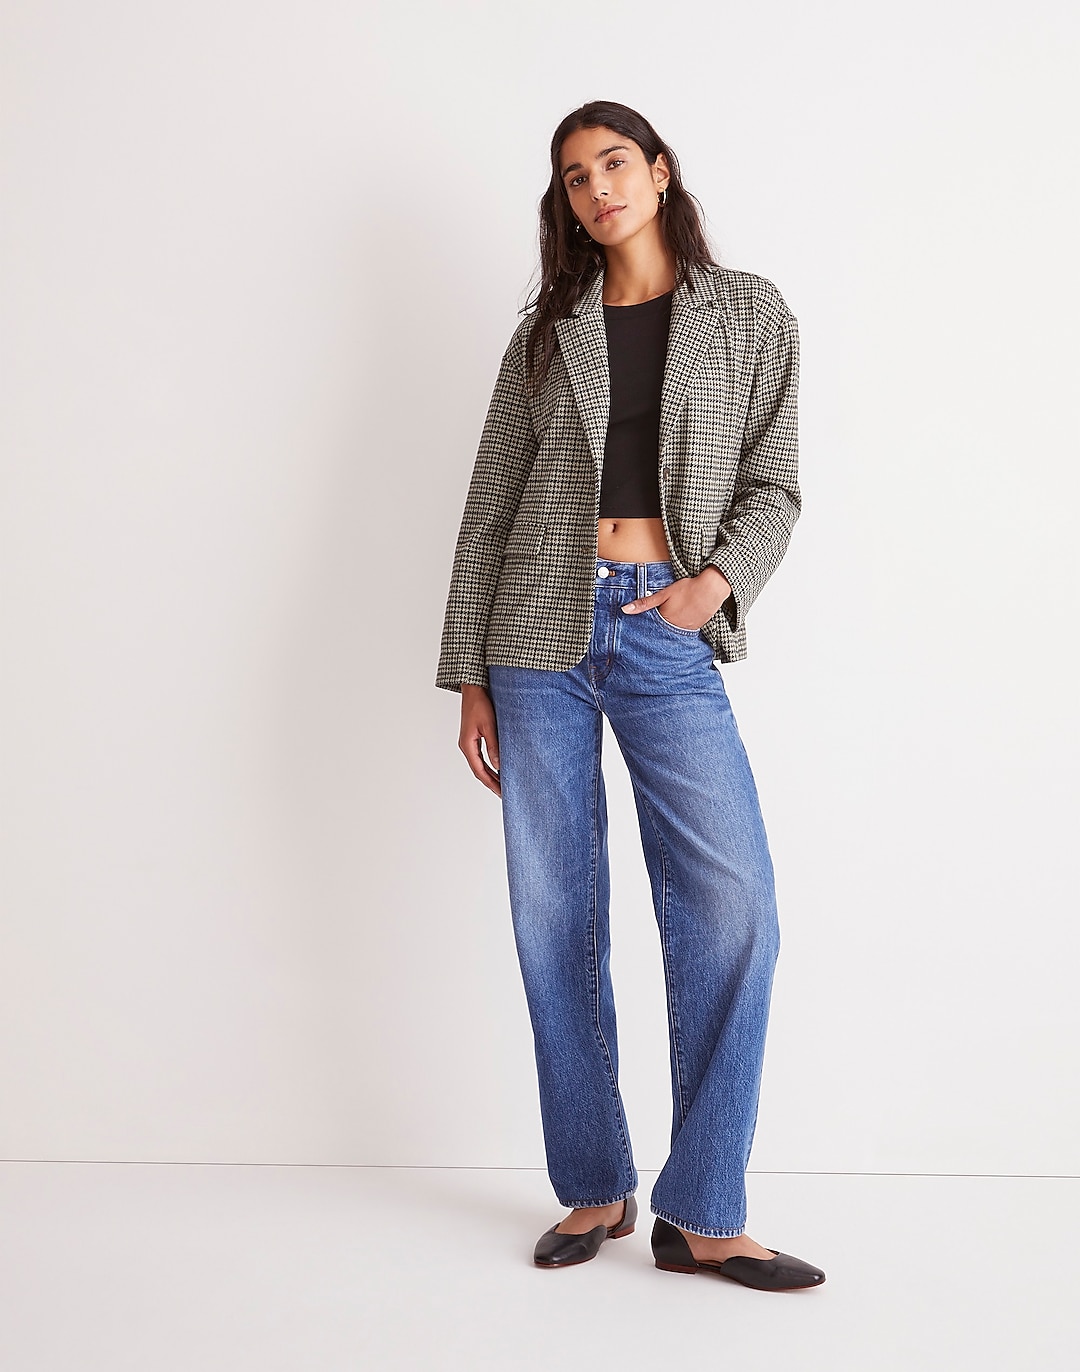 Oversized Knit Blazer in Houndstooth | Madewell